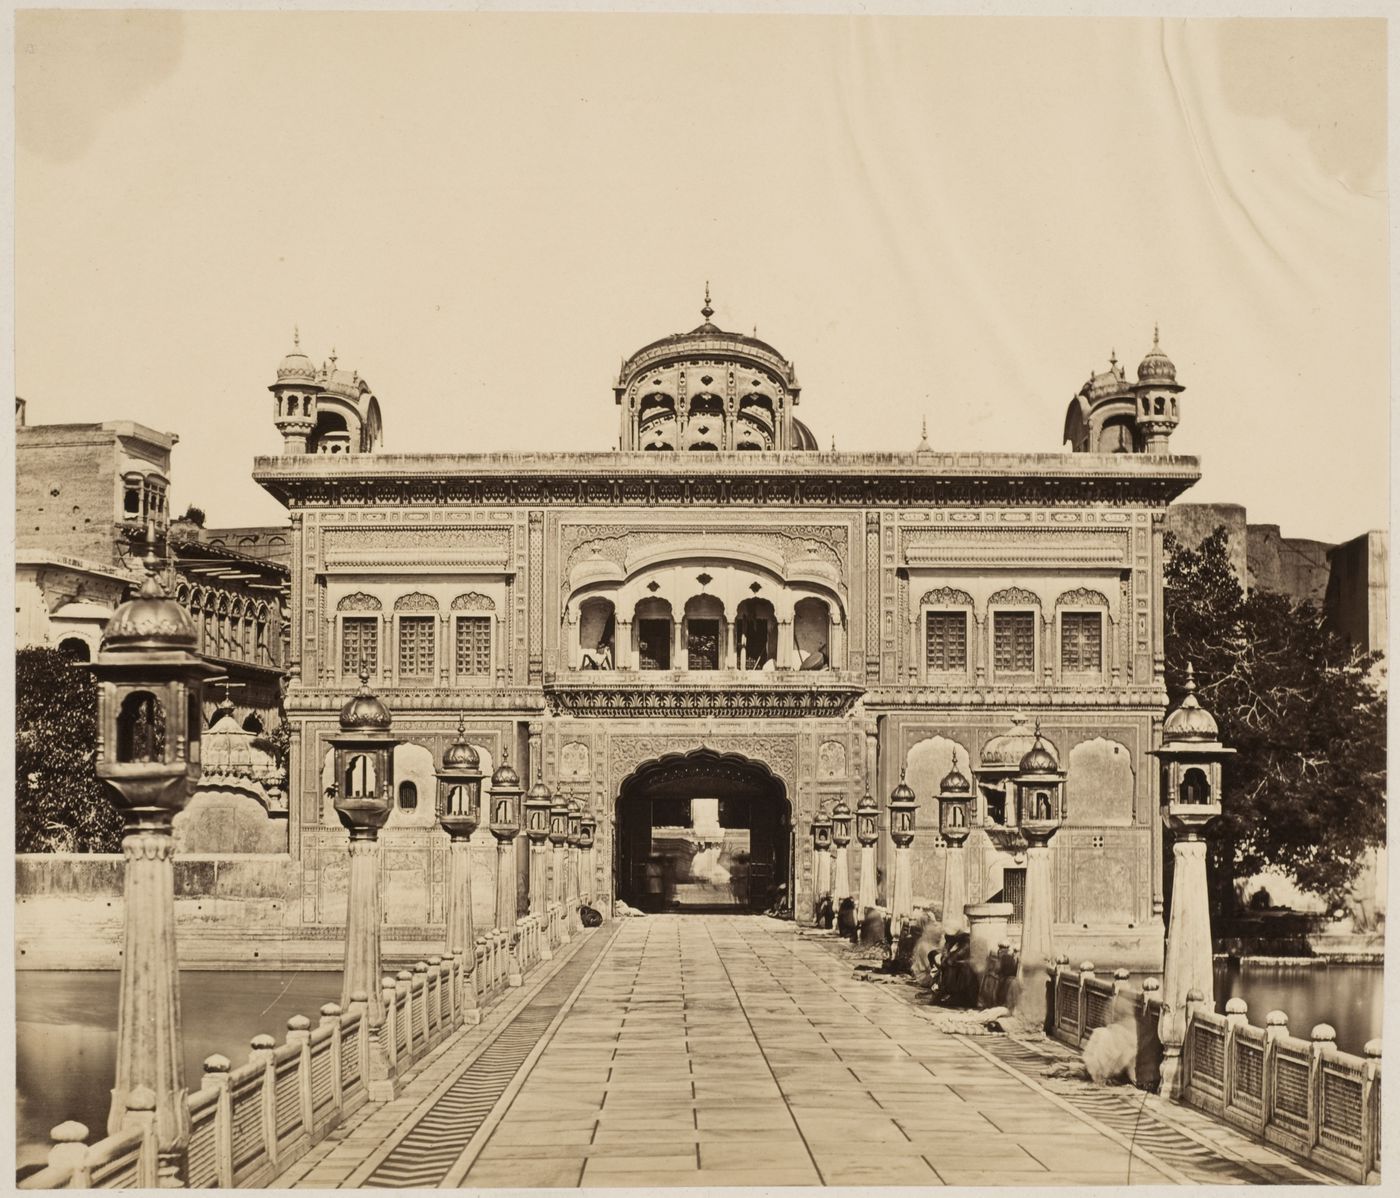 View of the portal of the Golden Temple, Amritsar, India